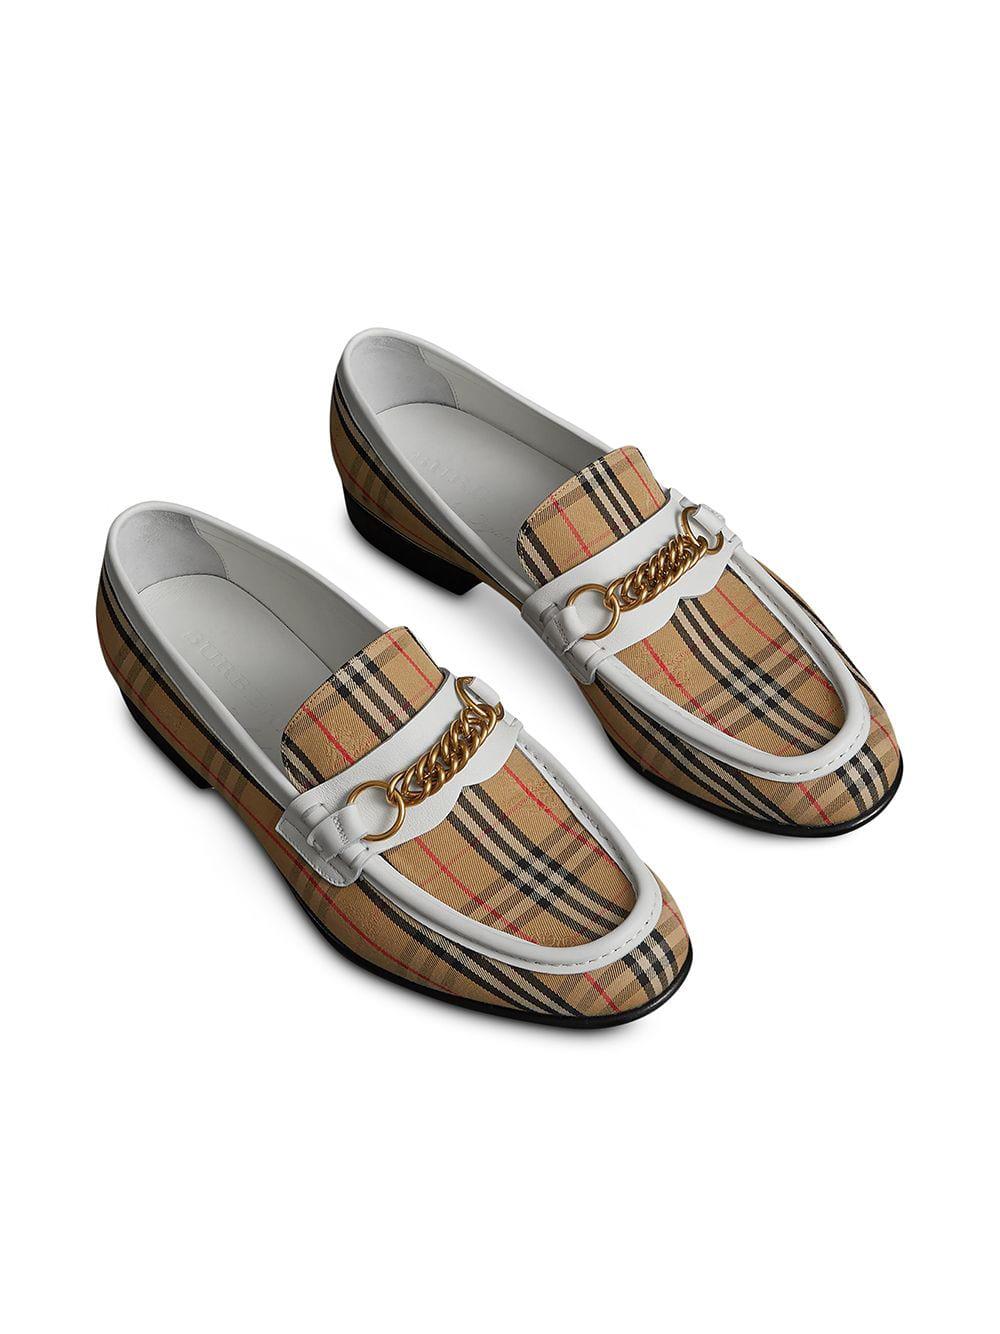 Burberry Leather The 1983 Check Link Loafer in Yellow for Men - Lyst